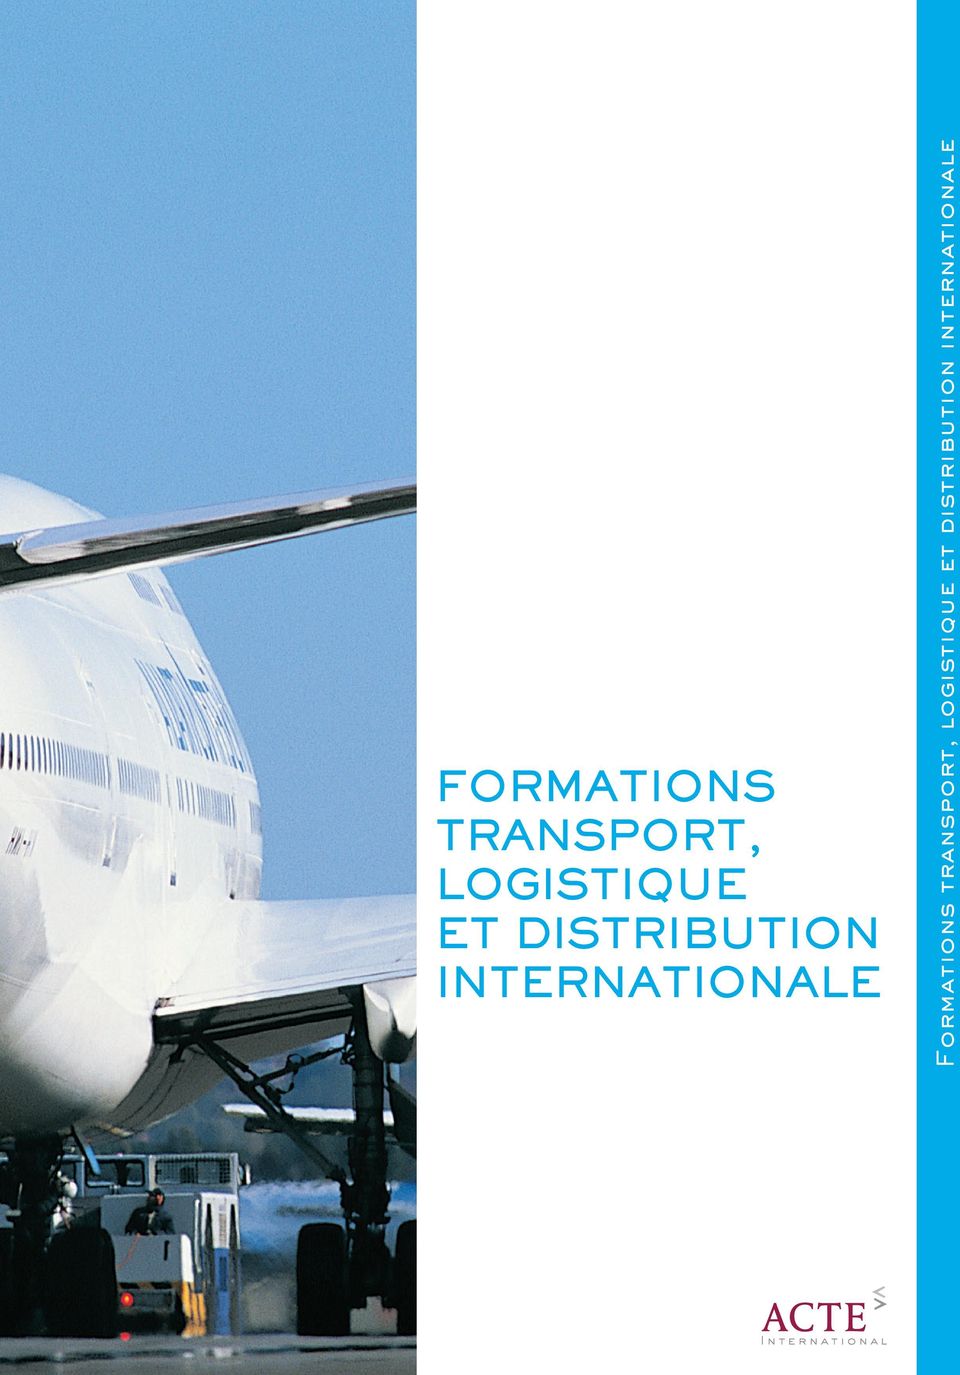 internationale FORMATIONS